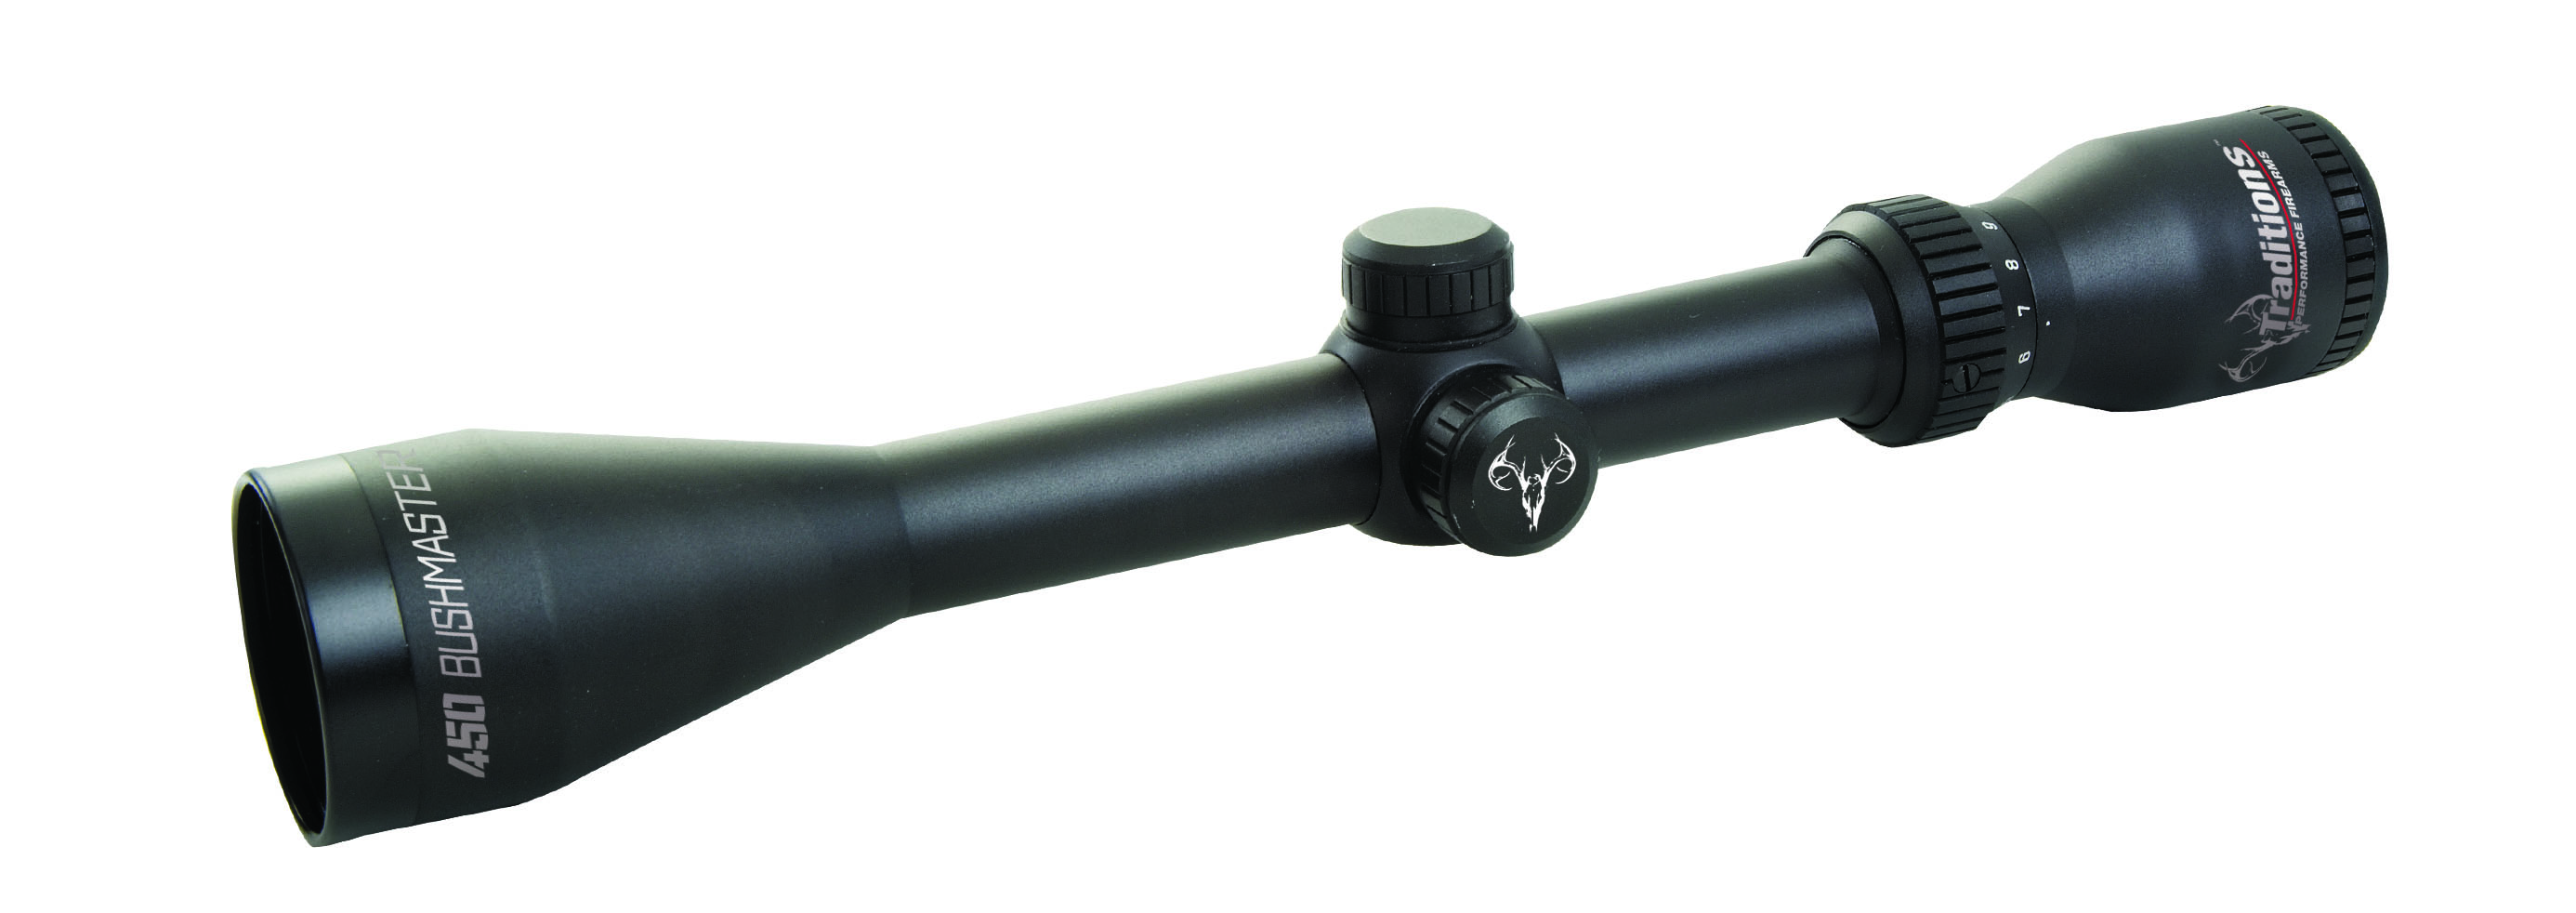 Rifle Hunter Series 3-9x40 Scope with Range-Finding Reticle Matte Black